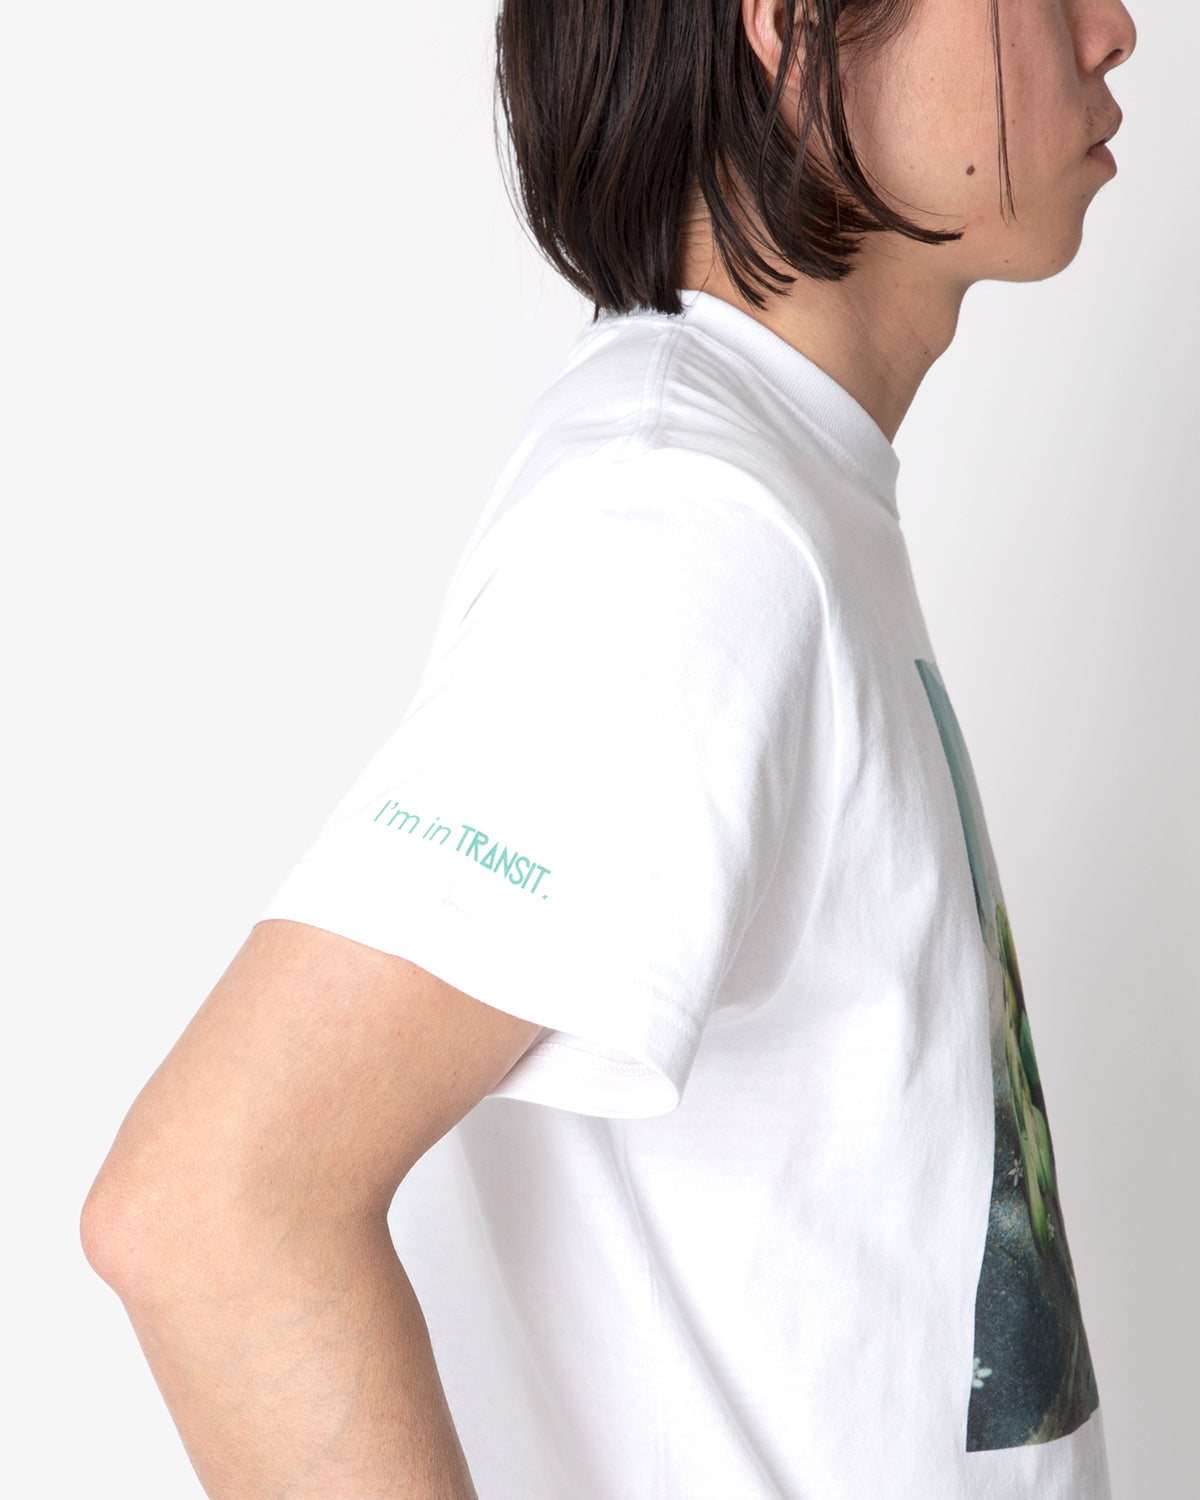 T-shirts（Coconut ）/ photo by 西山勲